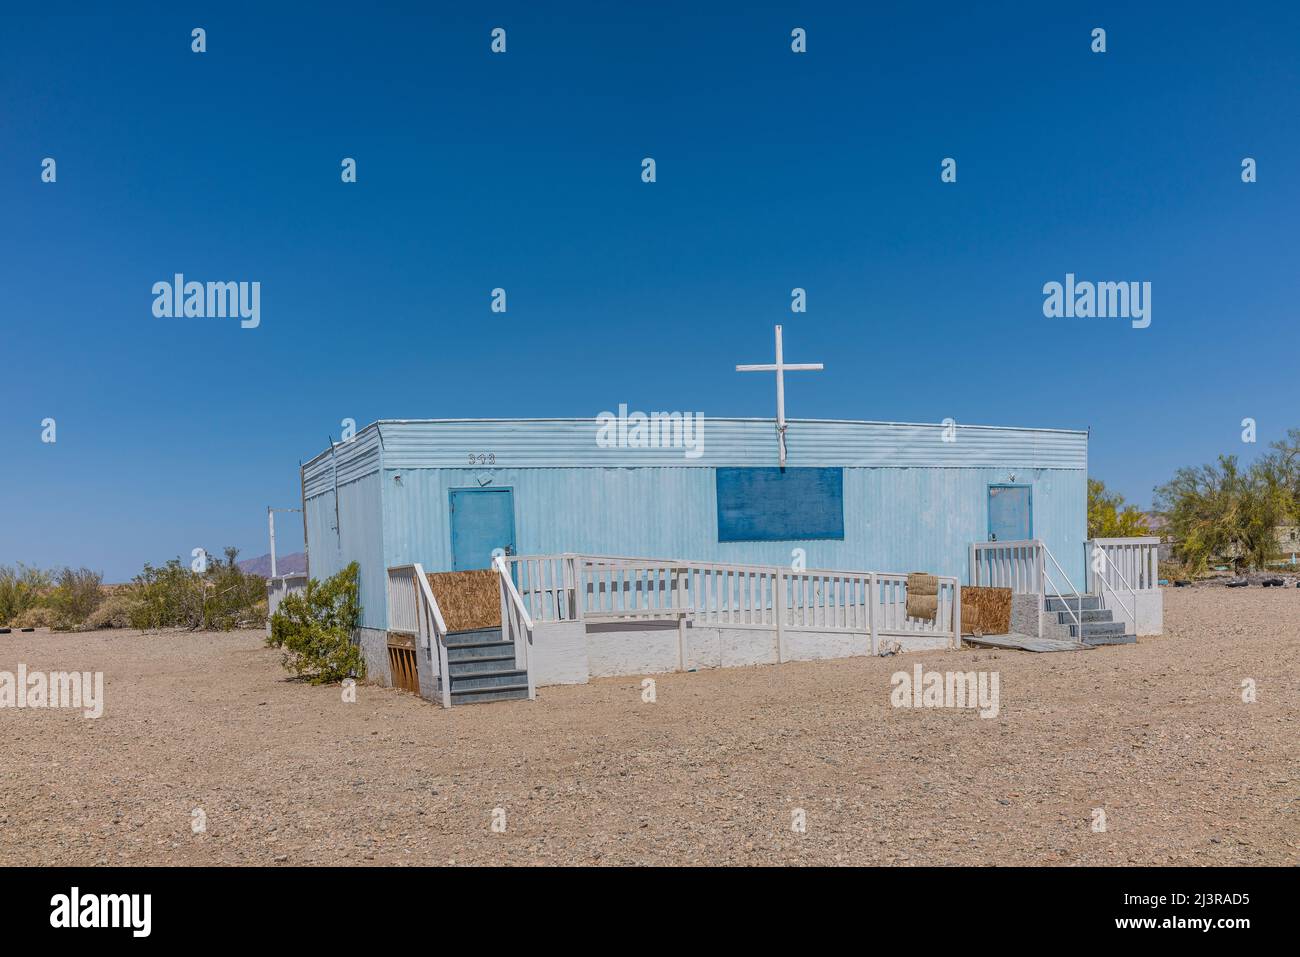 A blue trailer church in Slab City, California with a white wooden cross on top and with stairs on both ends. The church is ADA accessible via a long Stock Photo